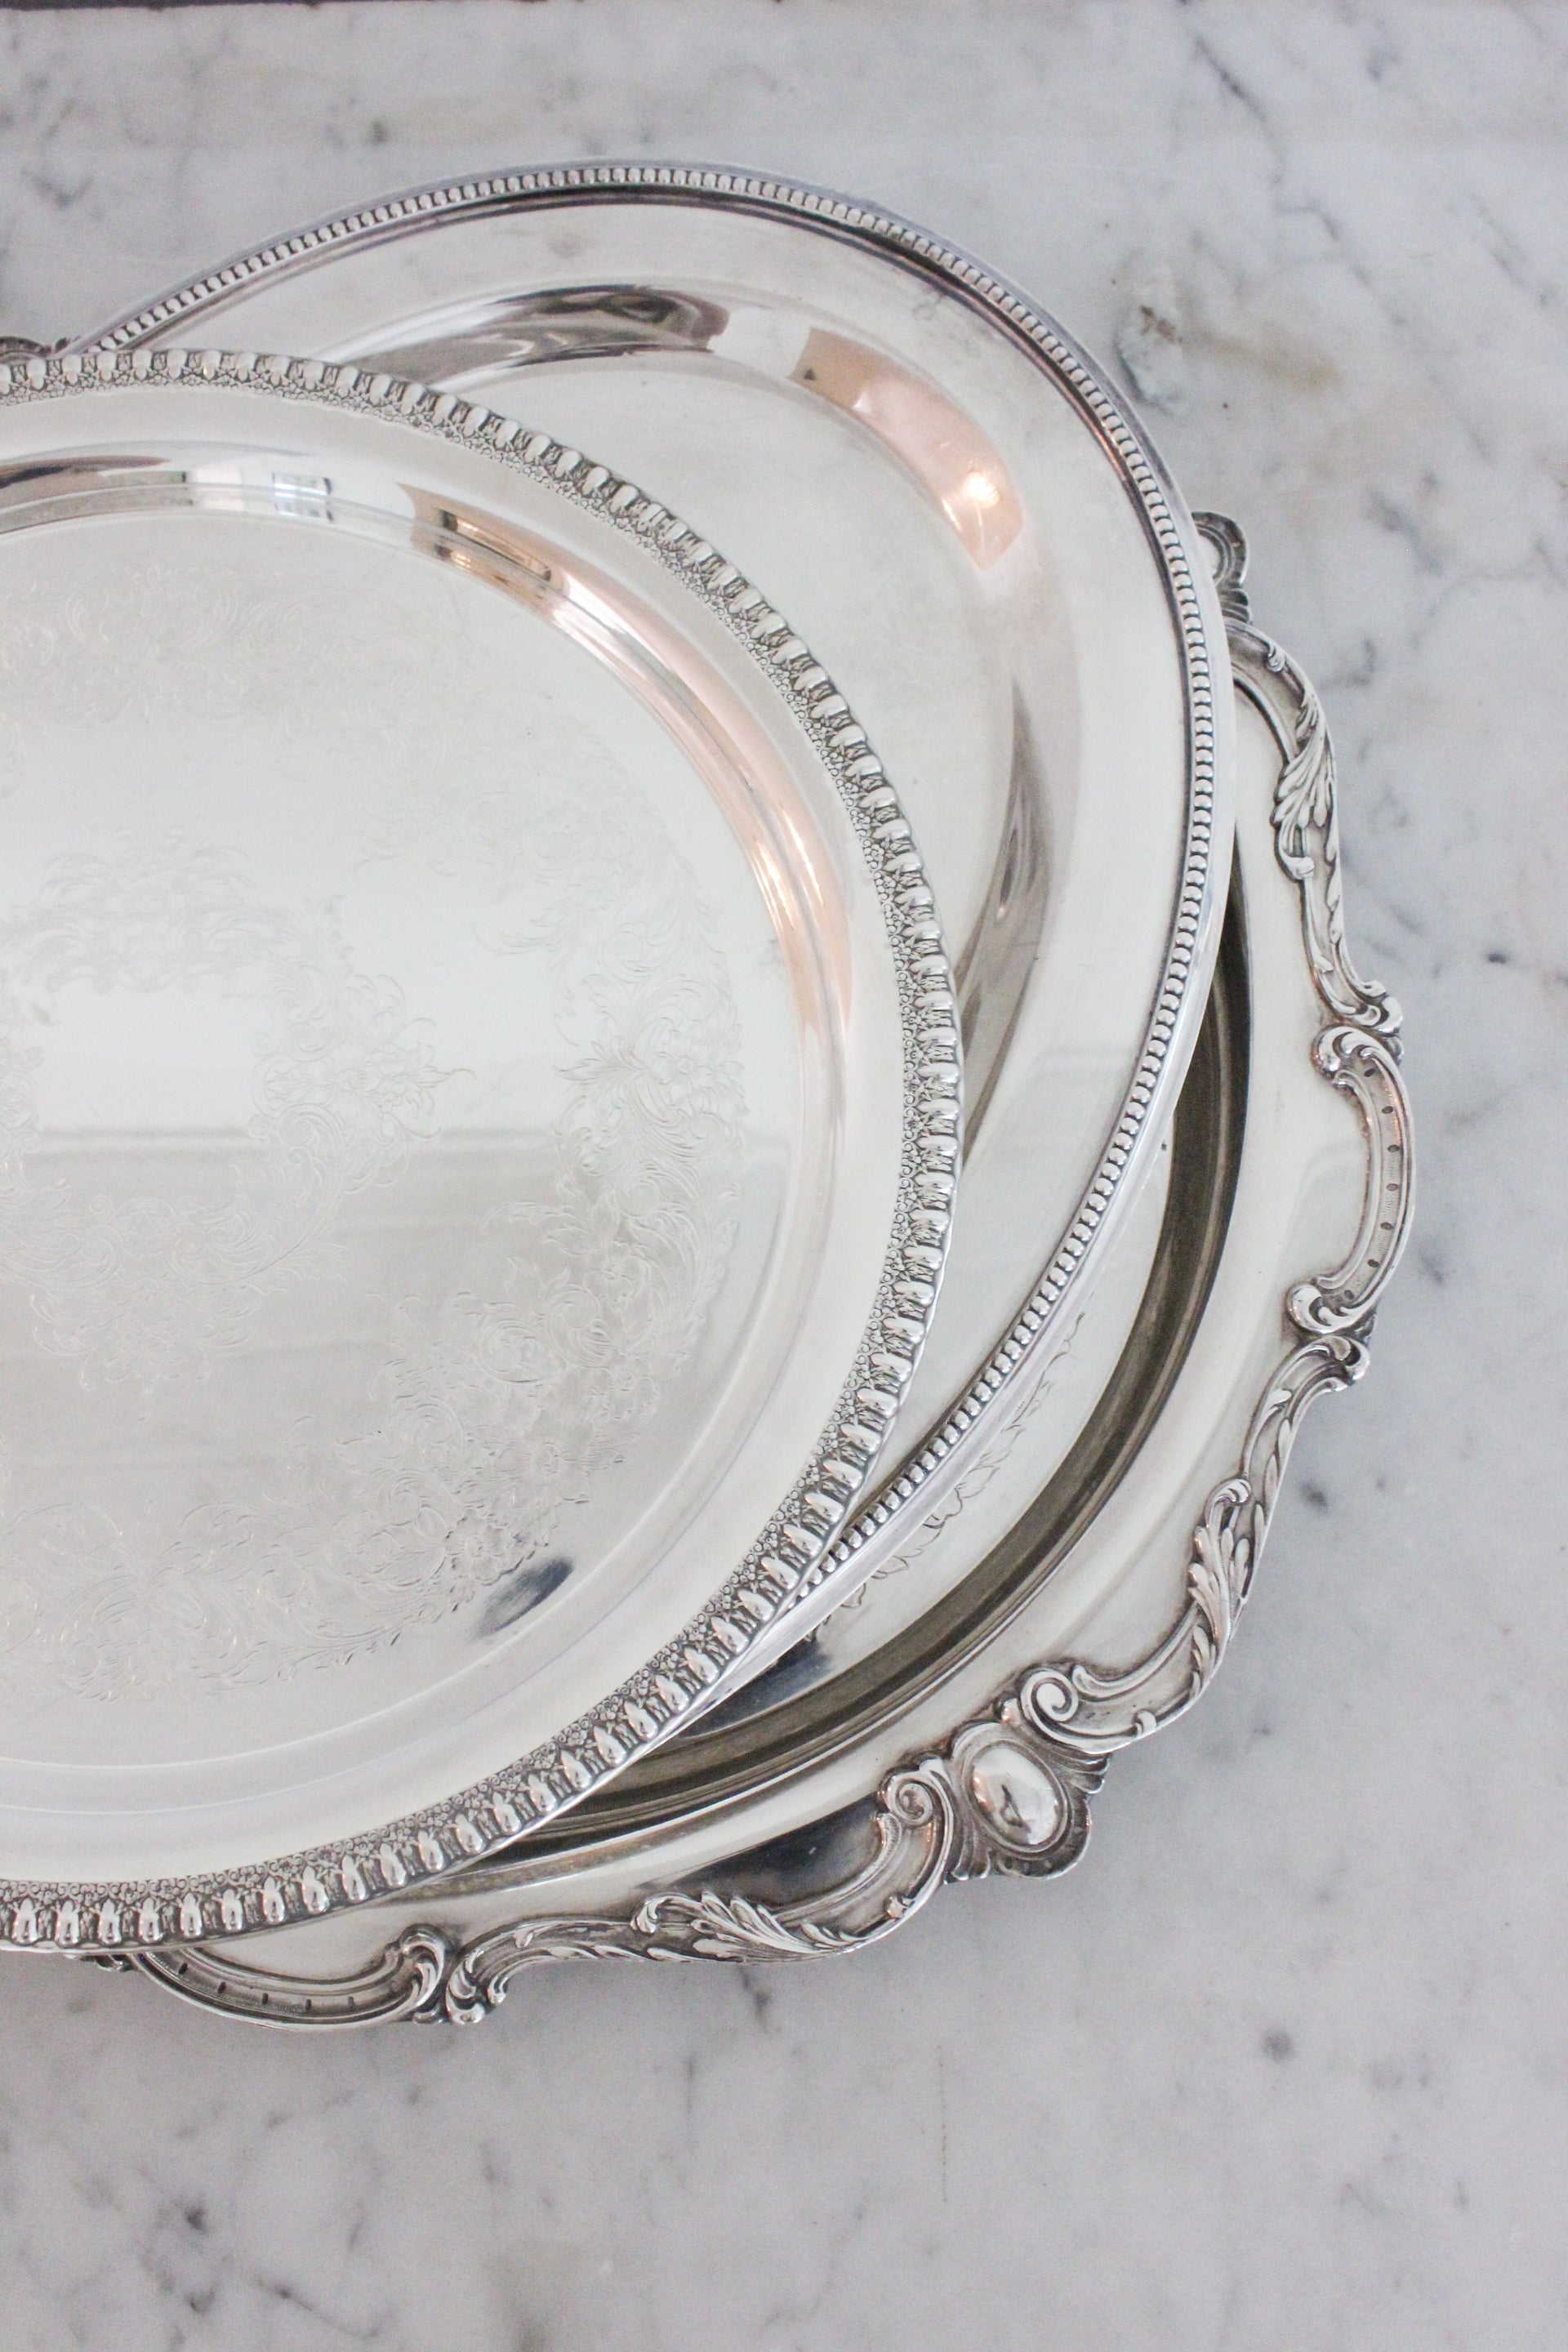 Vintage American Silver Plate Tray